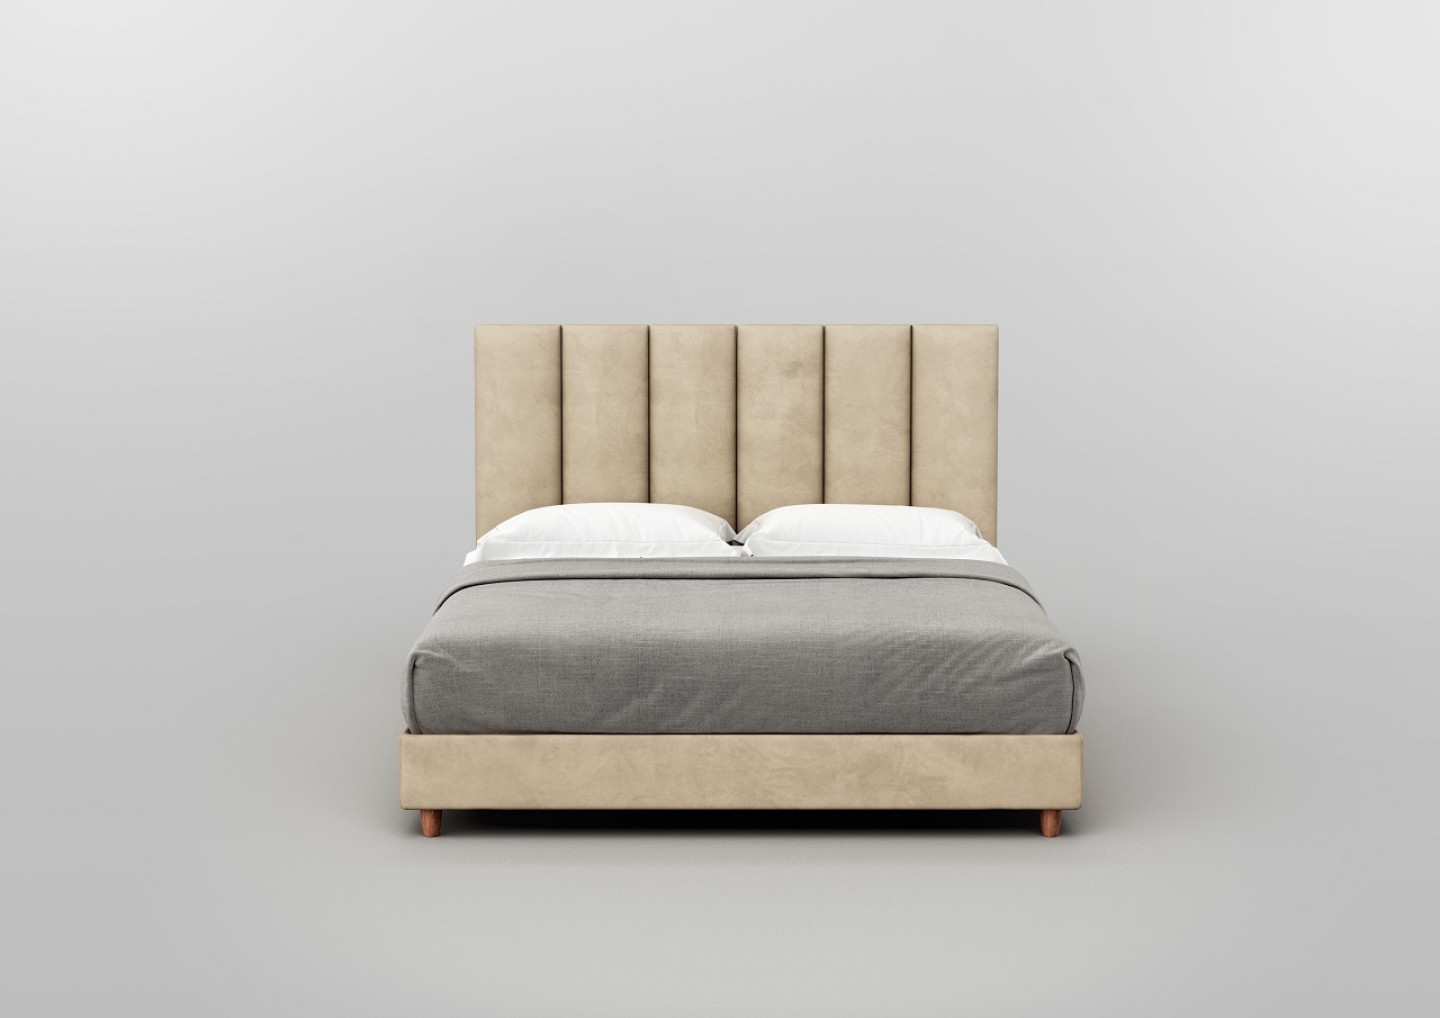 THE VITTO BED by Elite Strom